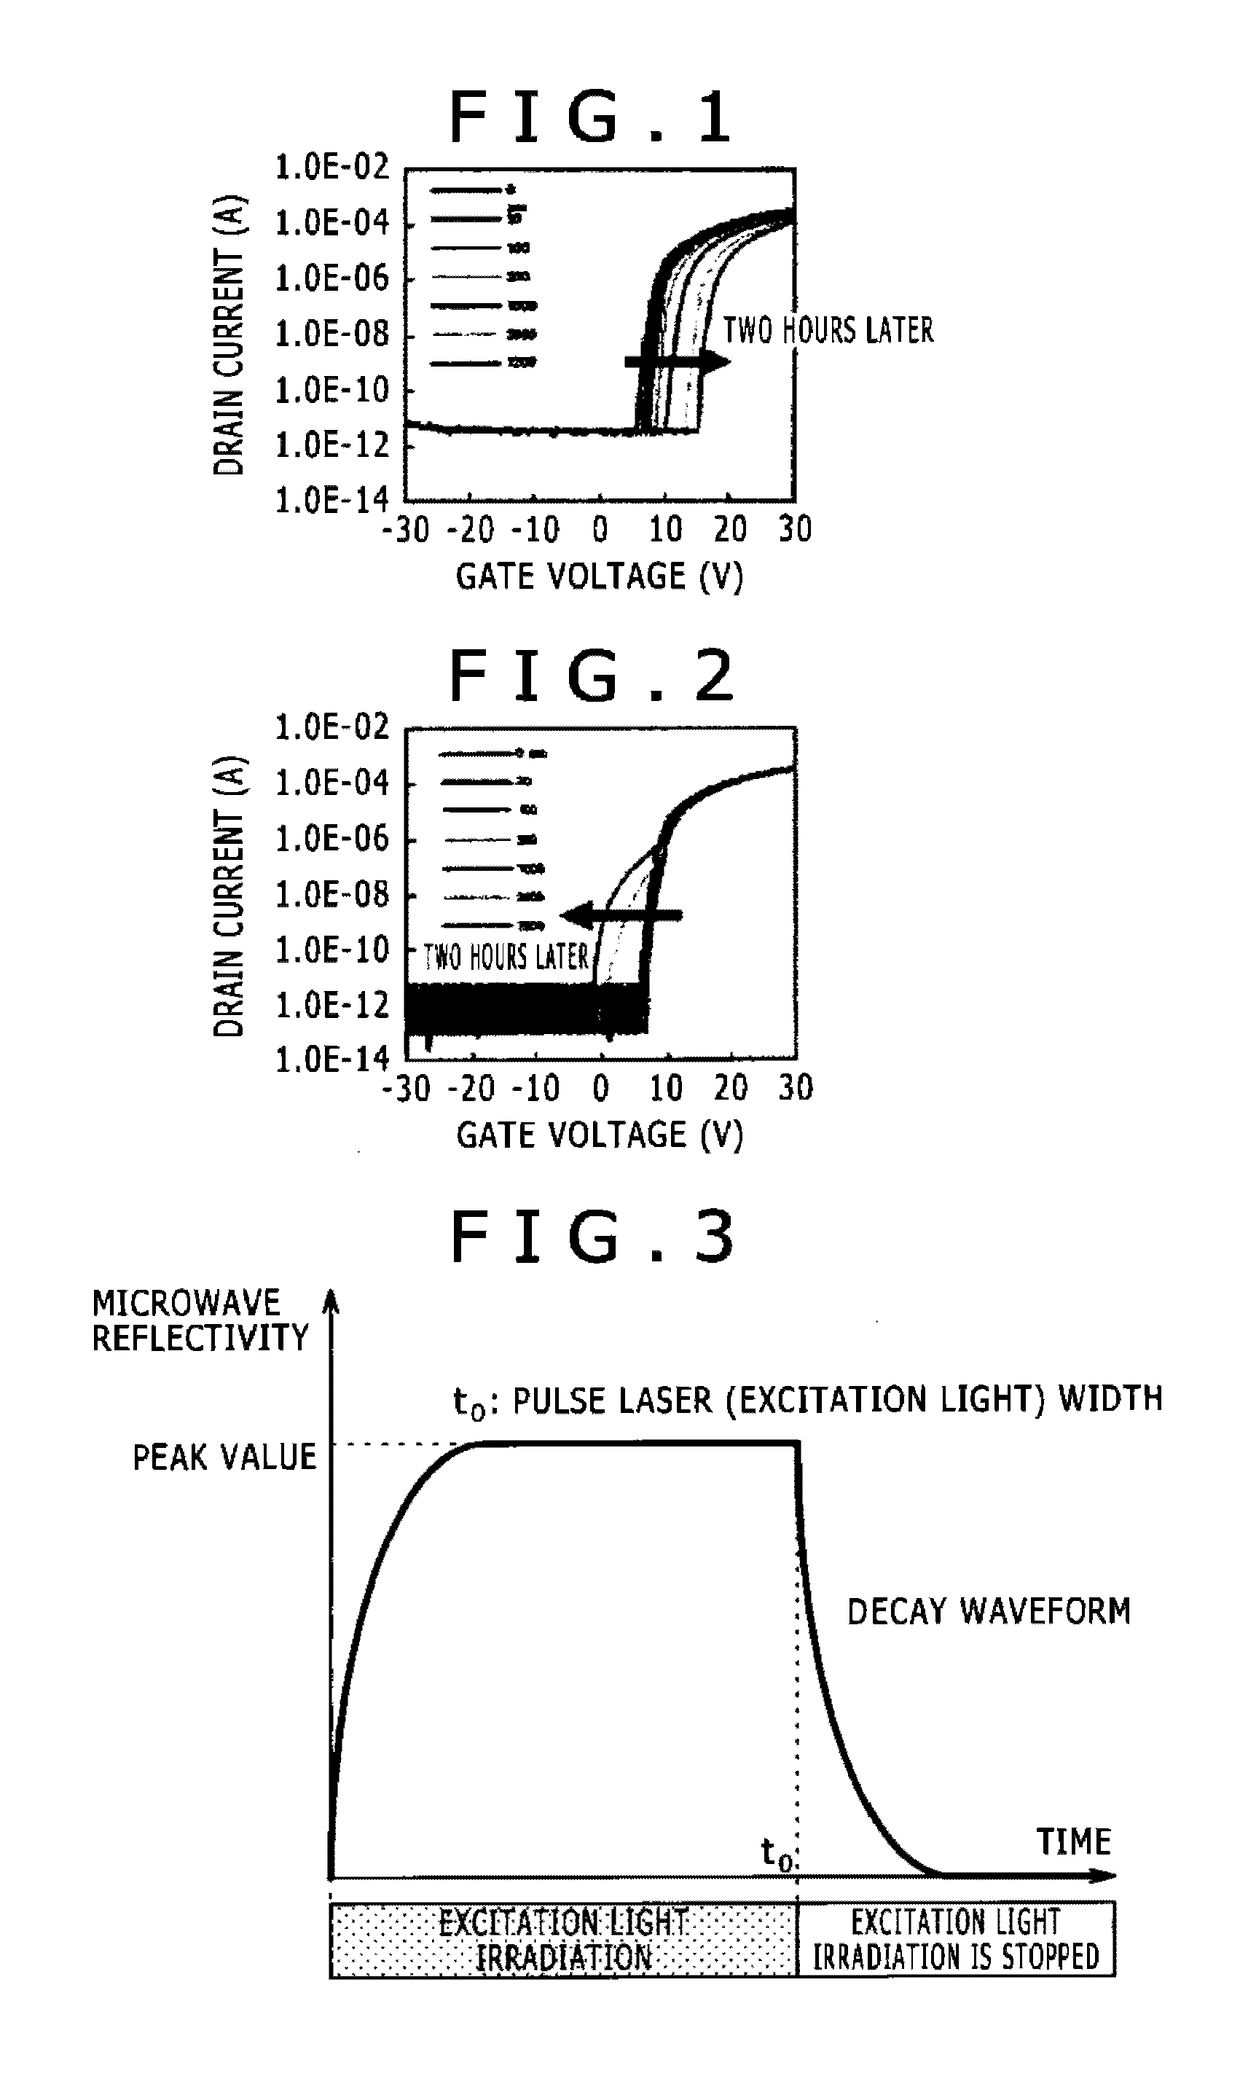 Method for evaluating quality of oxide semiconductor thin film and laminated body having protective film on surface of oxide semiconductor thin film, and method for managing quality of oxide semiconductor thin film